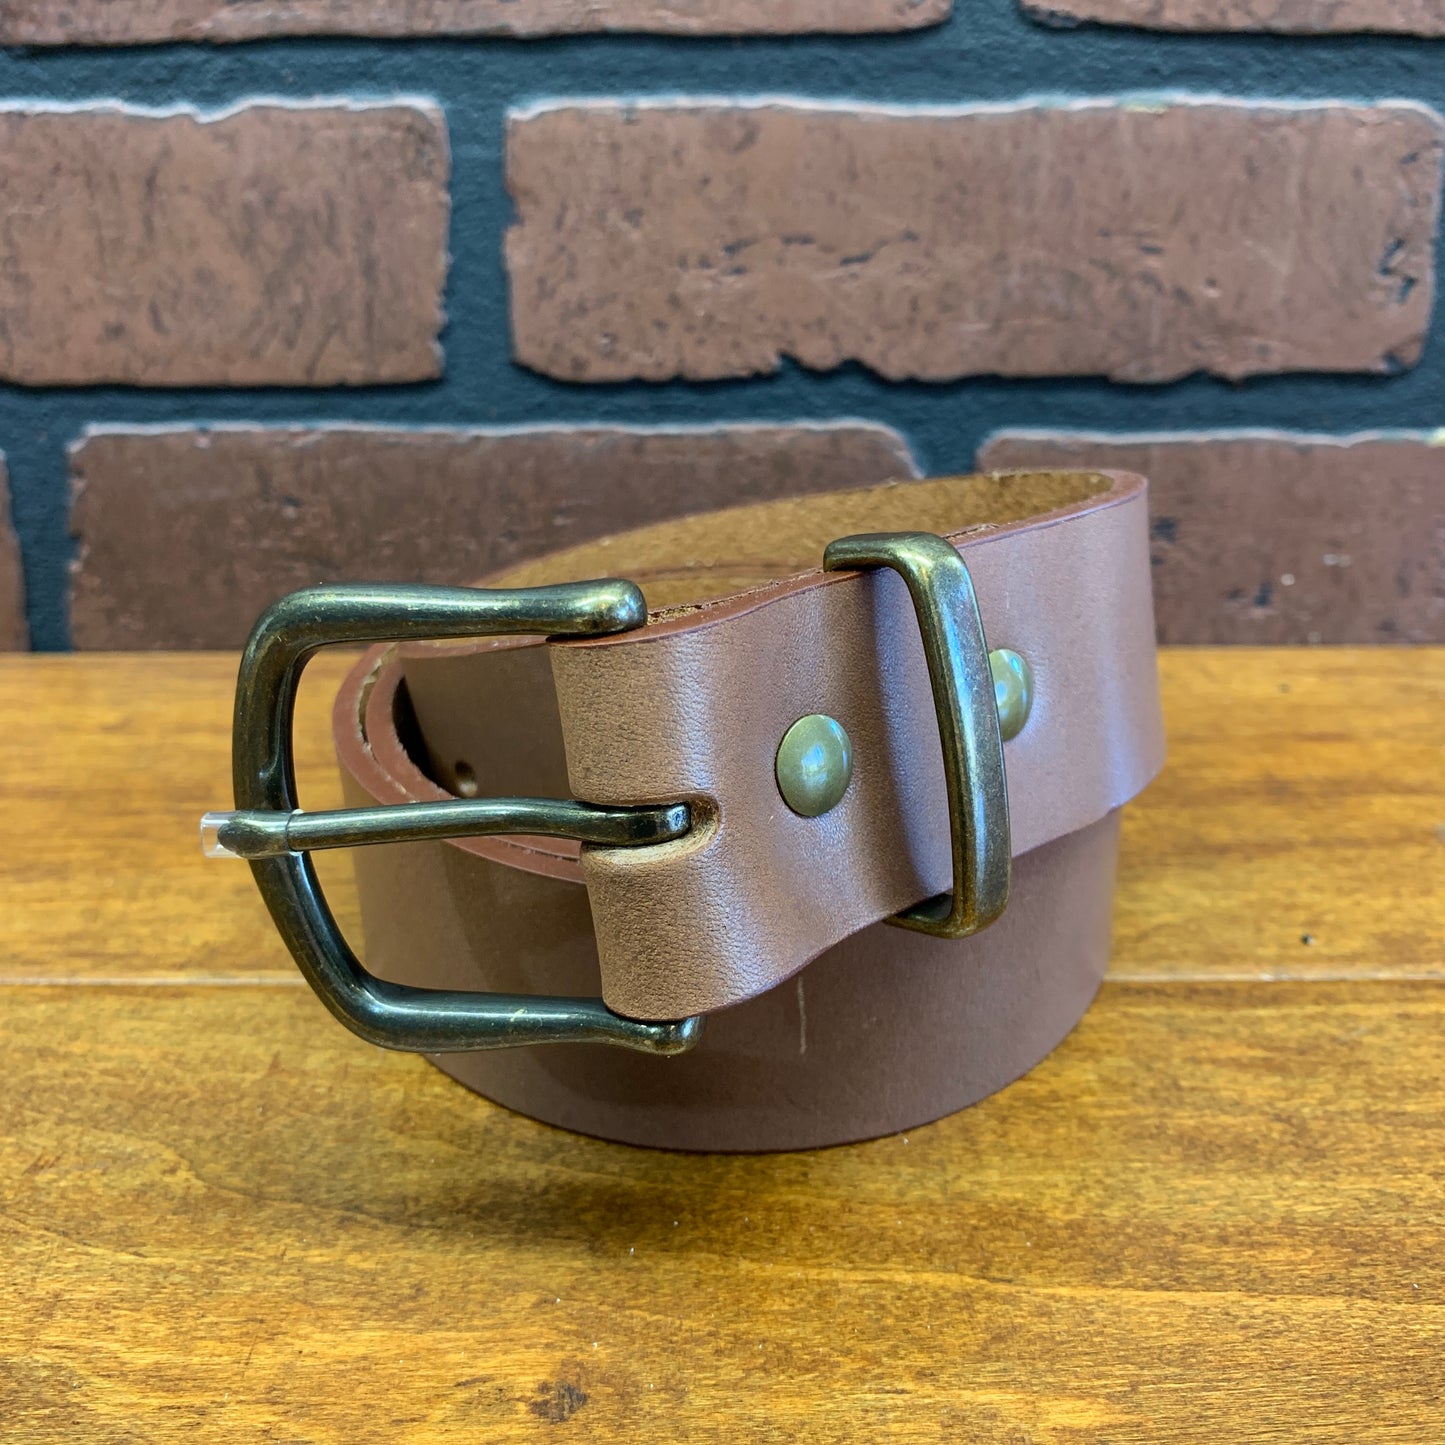 The Sienna Leather Belt